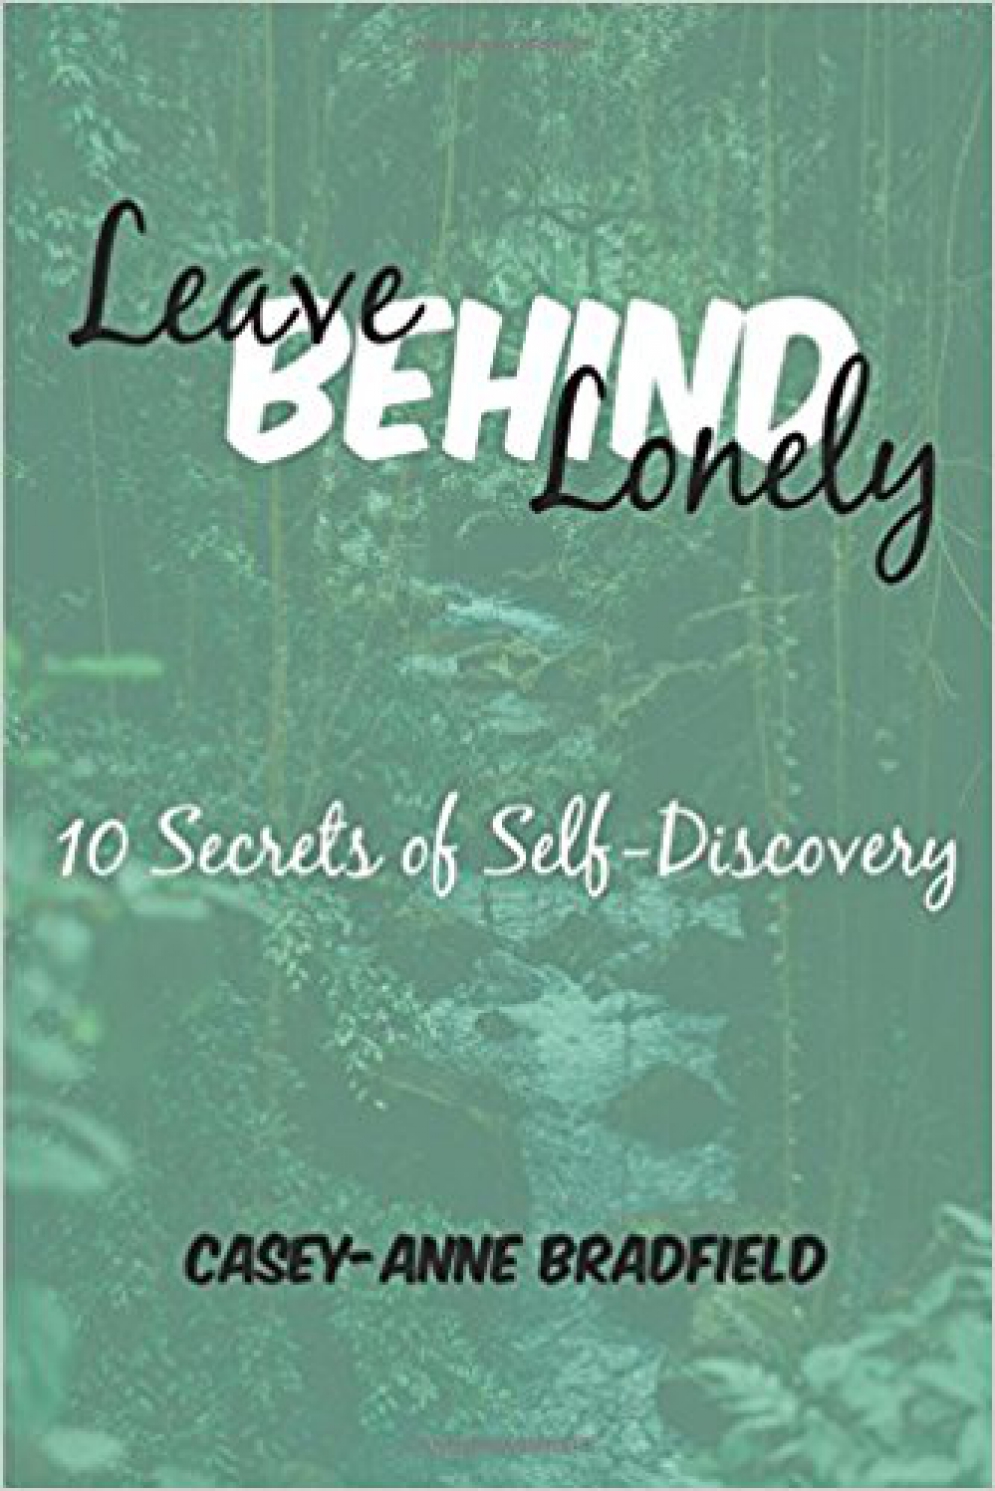 Feeling Lonely? You're Not Alone - Casey-Anne Bradfield Has Tips #author #books @matrixthinker @motivaterelate